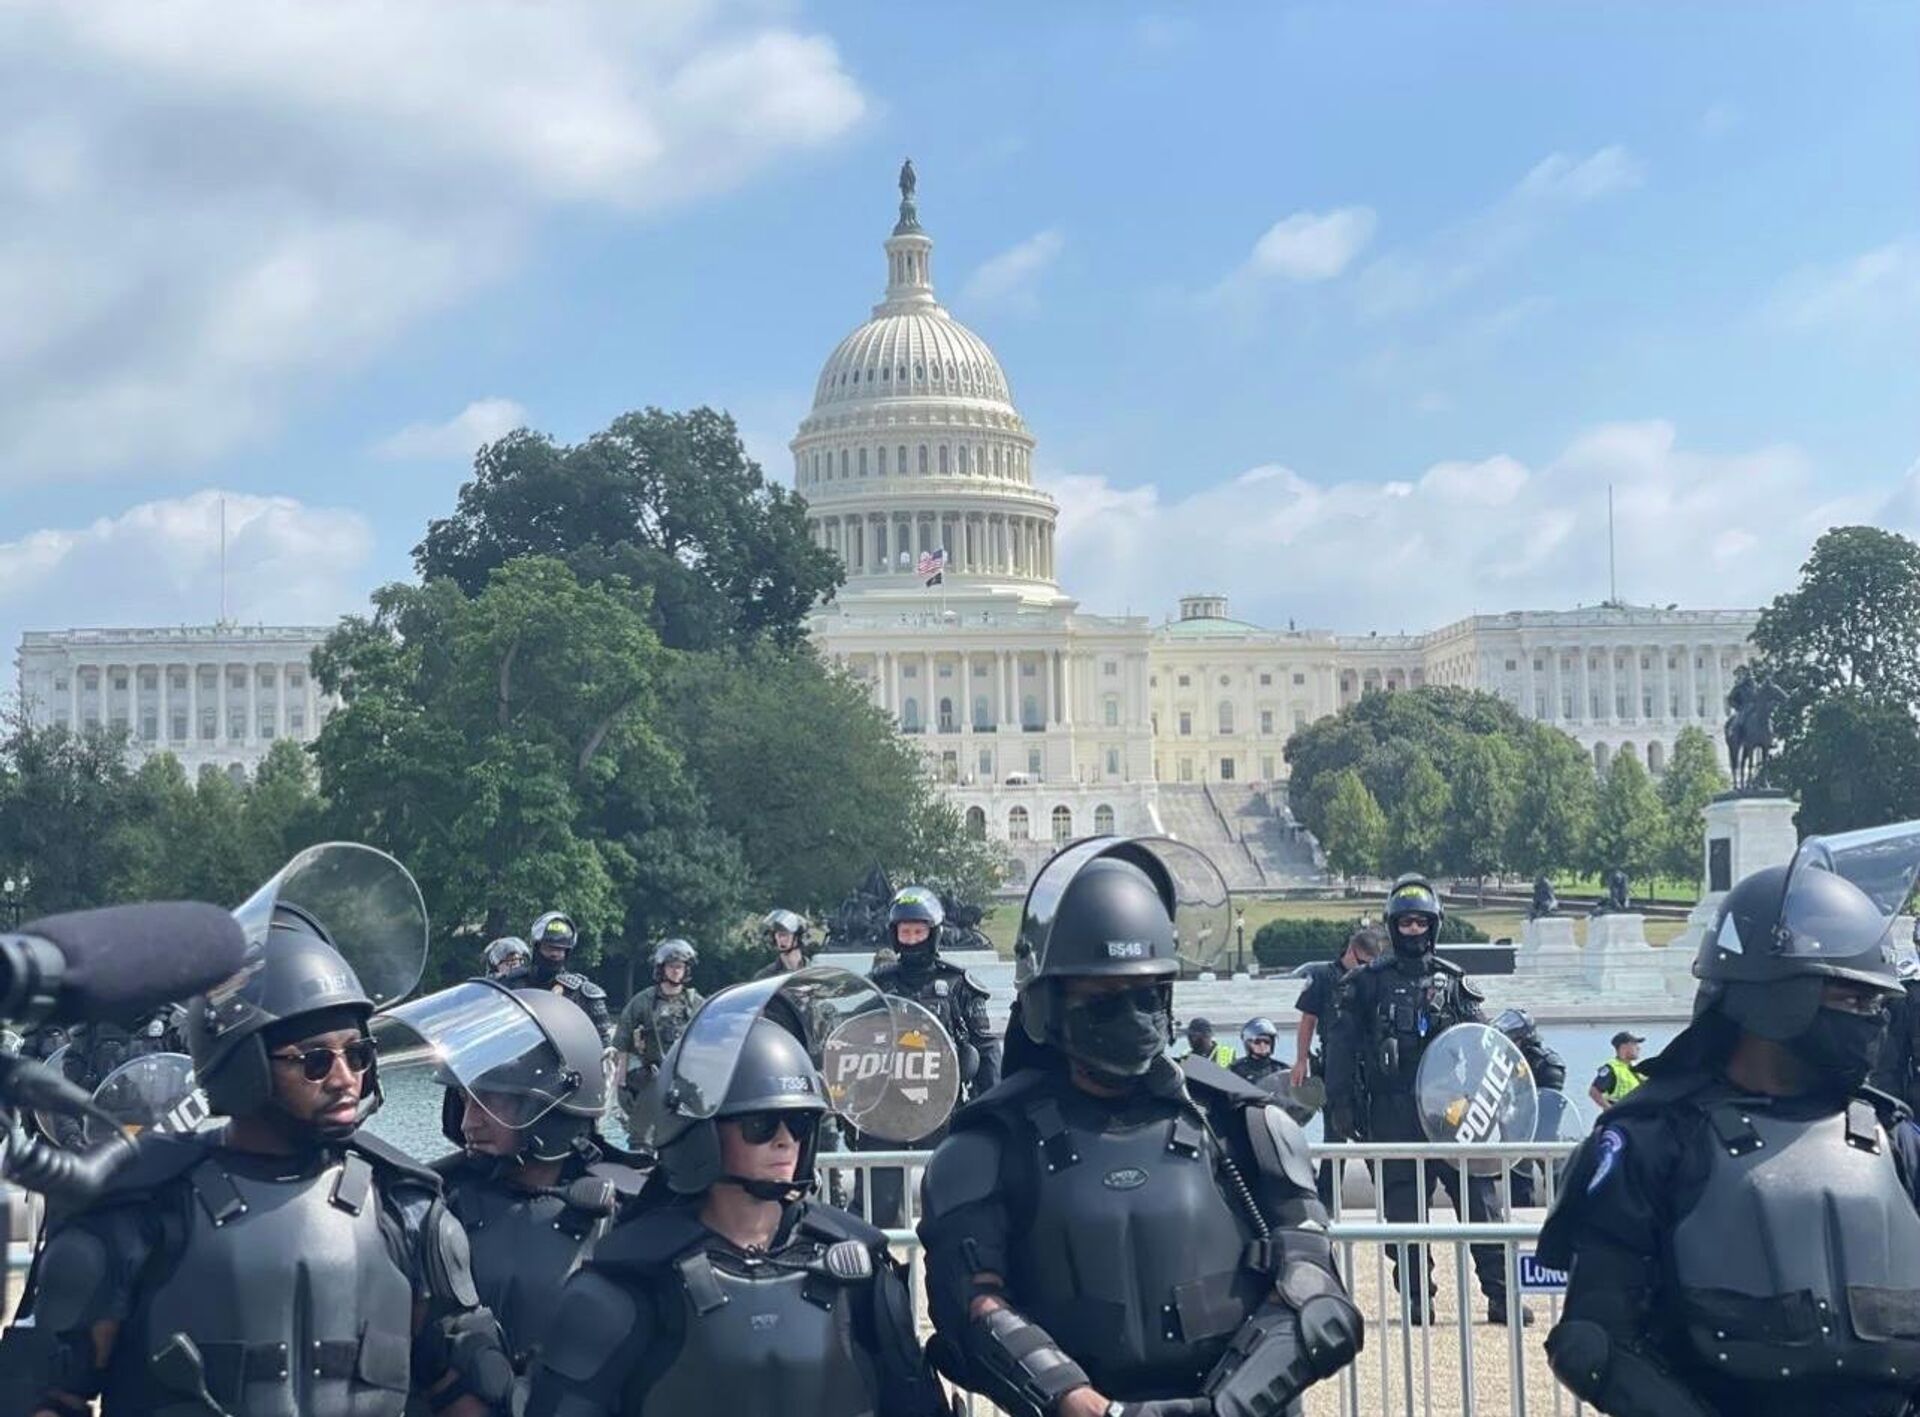 People gathered in DC on September 18 to participate in the Justice for J6 rally in support of people arrested after the January 6 riot - Sputnik International, 1920, 18.09.2021